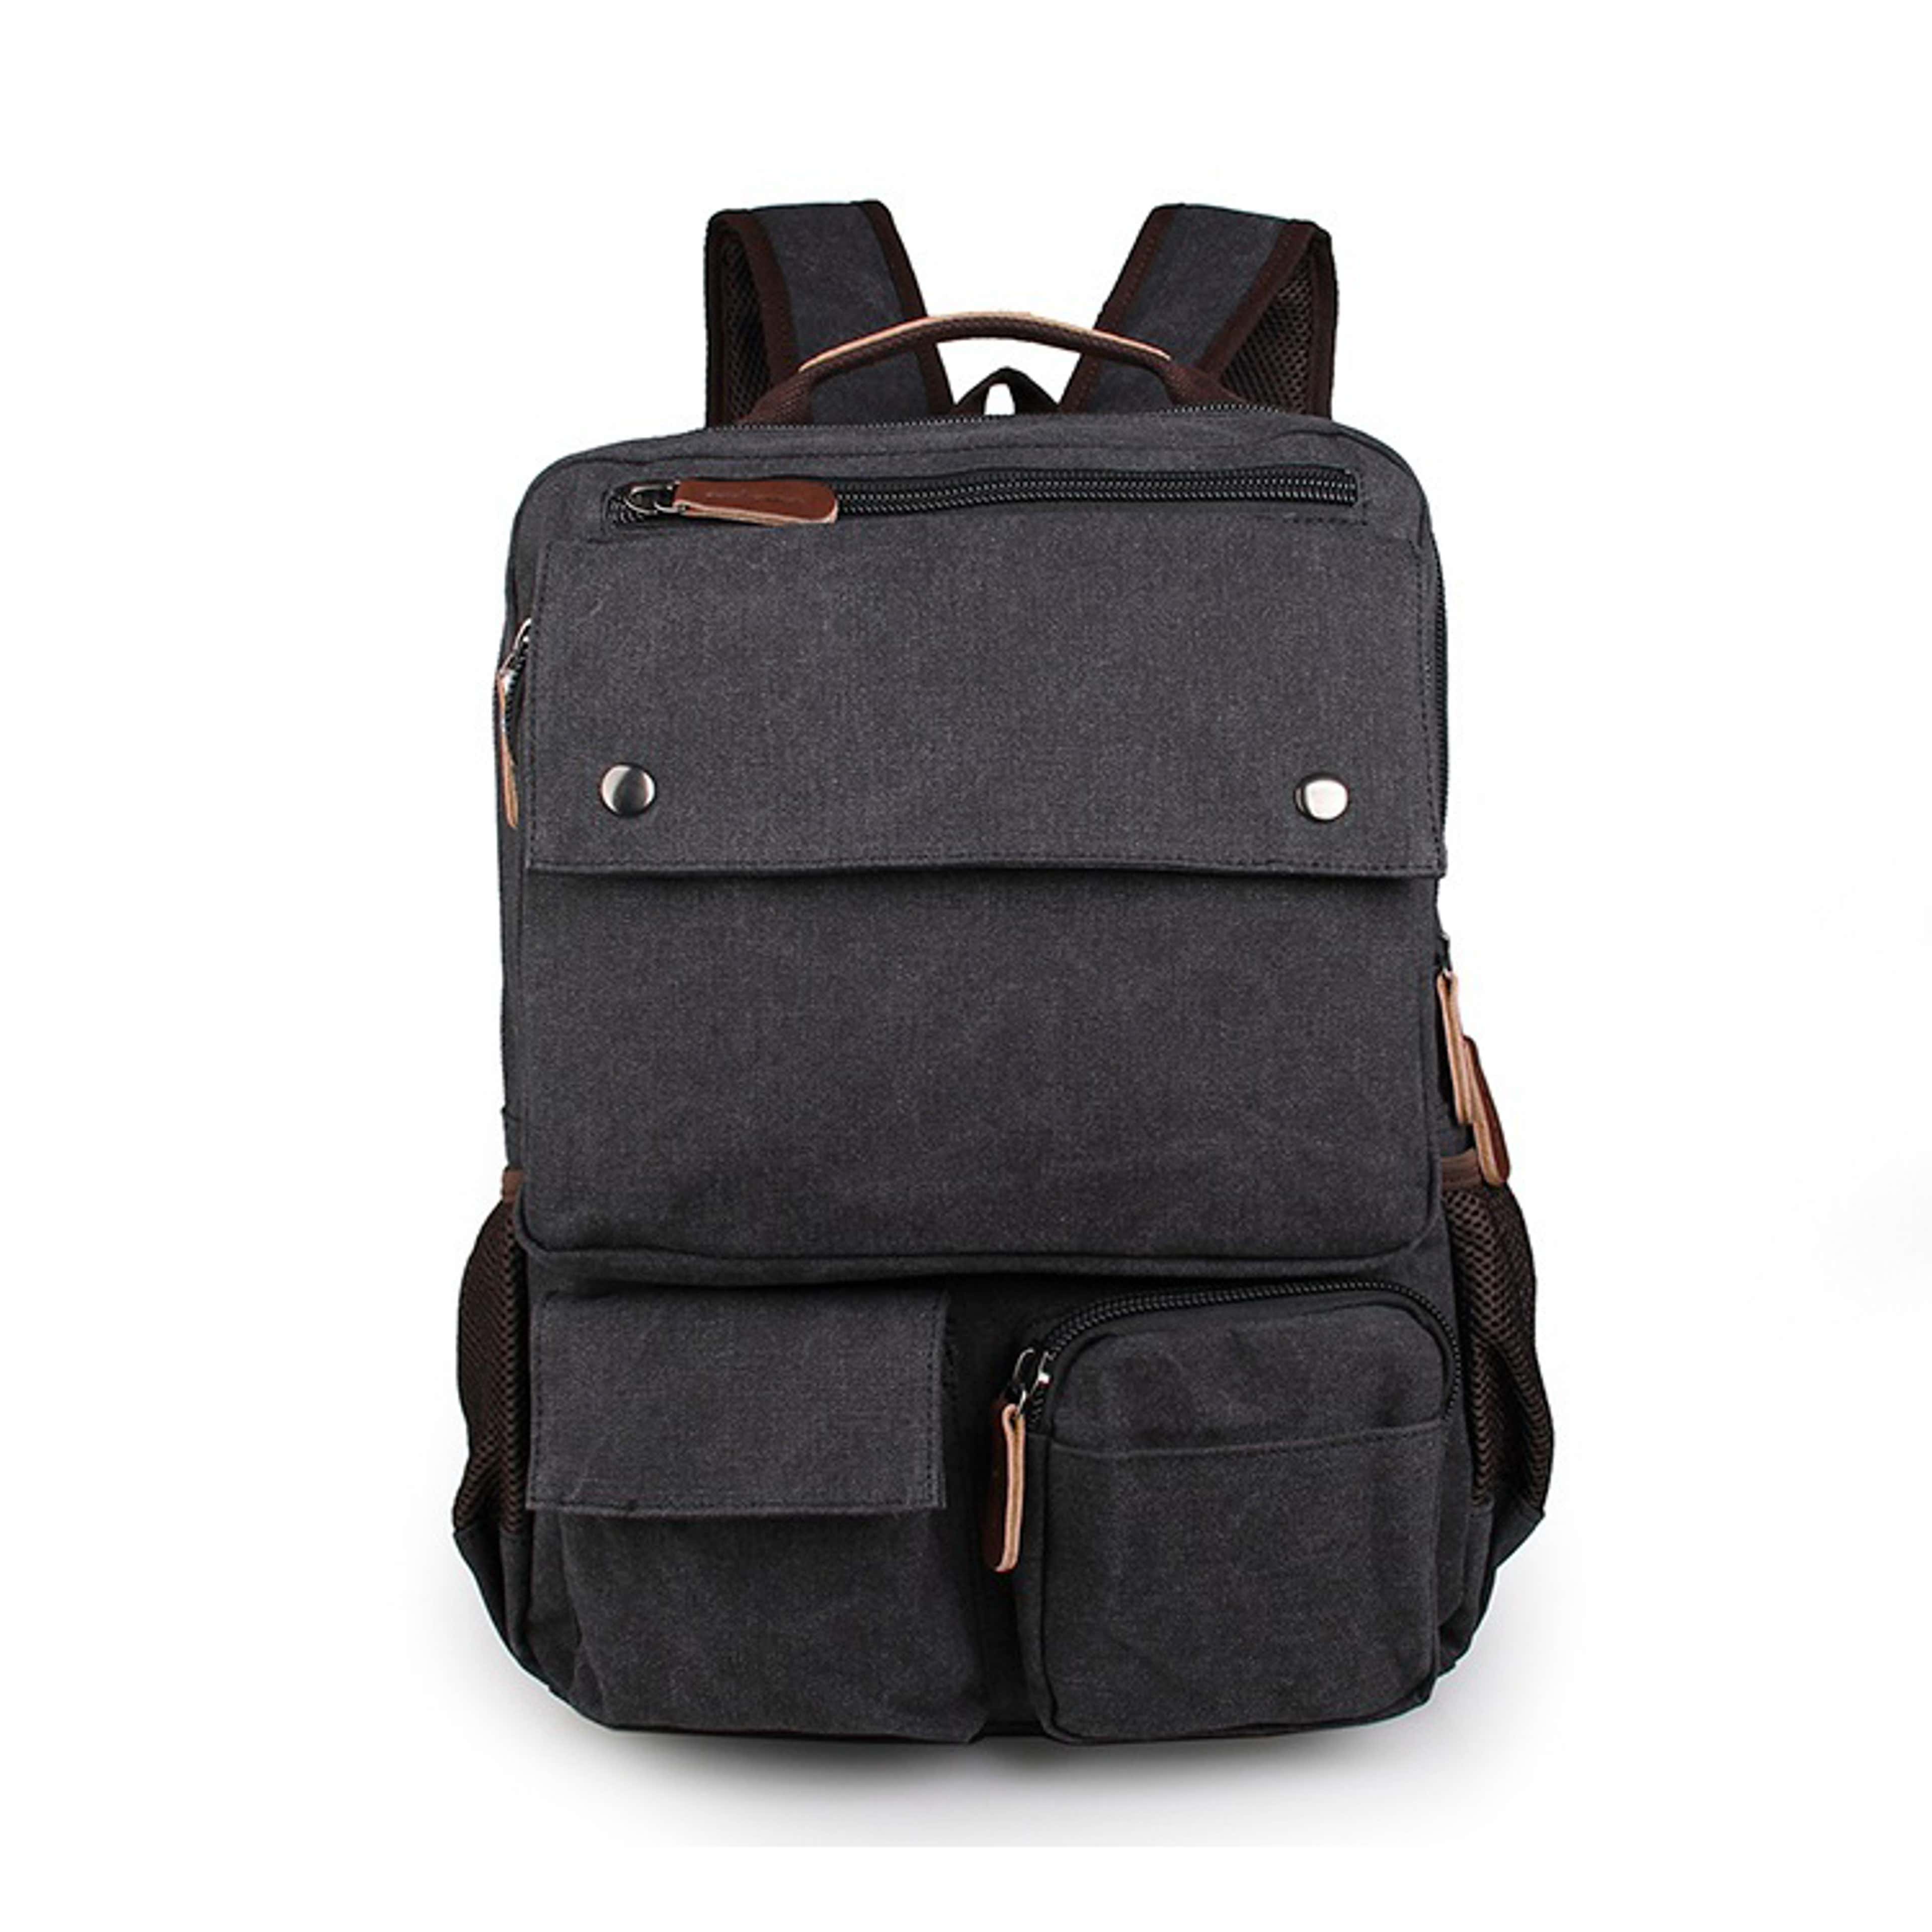 Grey Compact Backpack - 1 - gallery